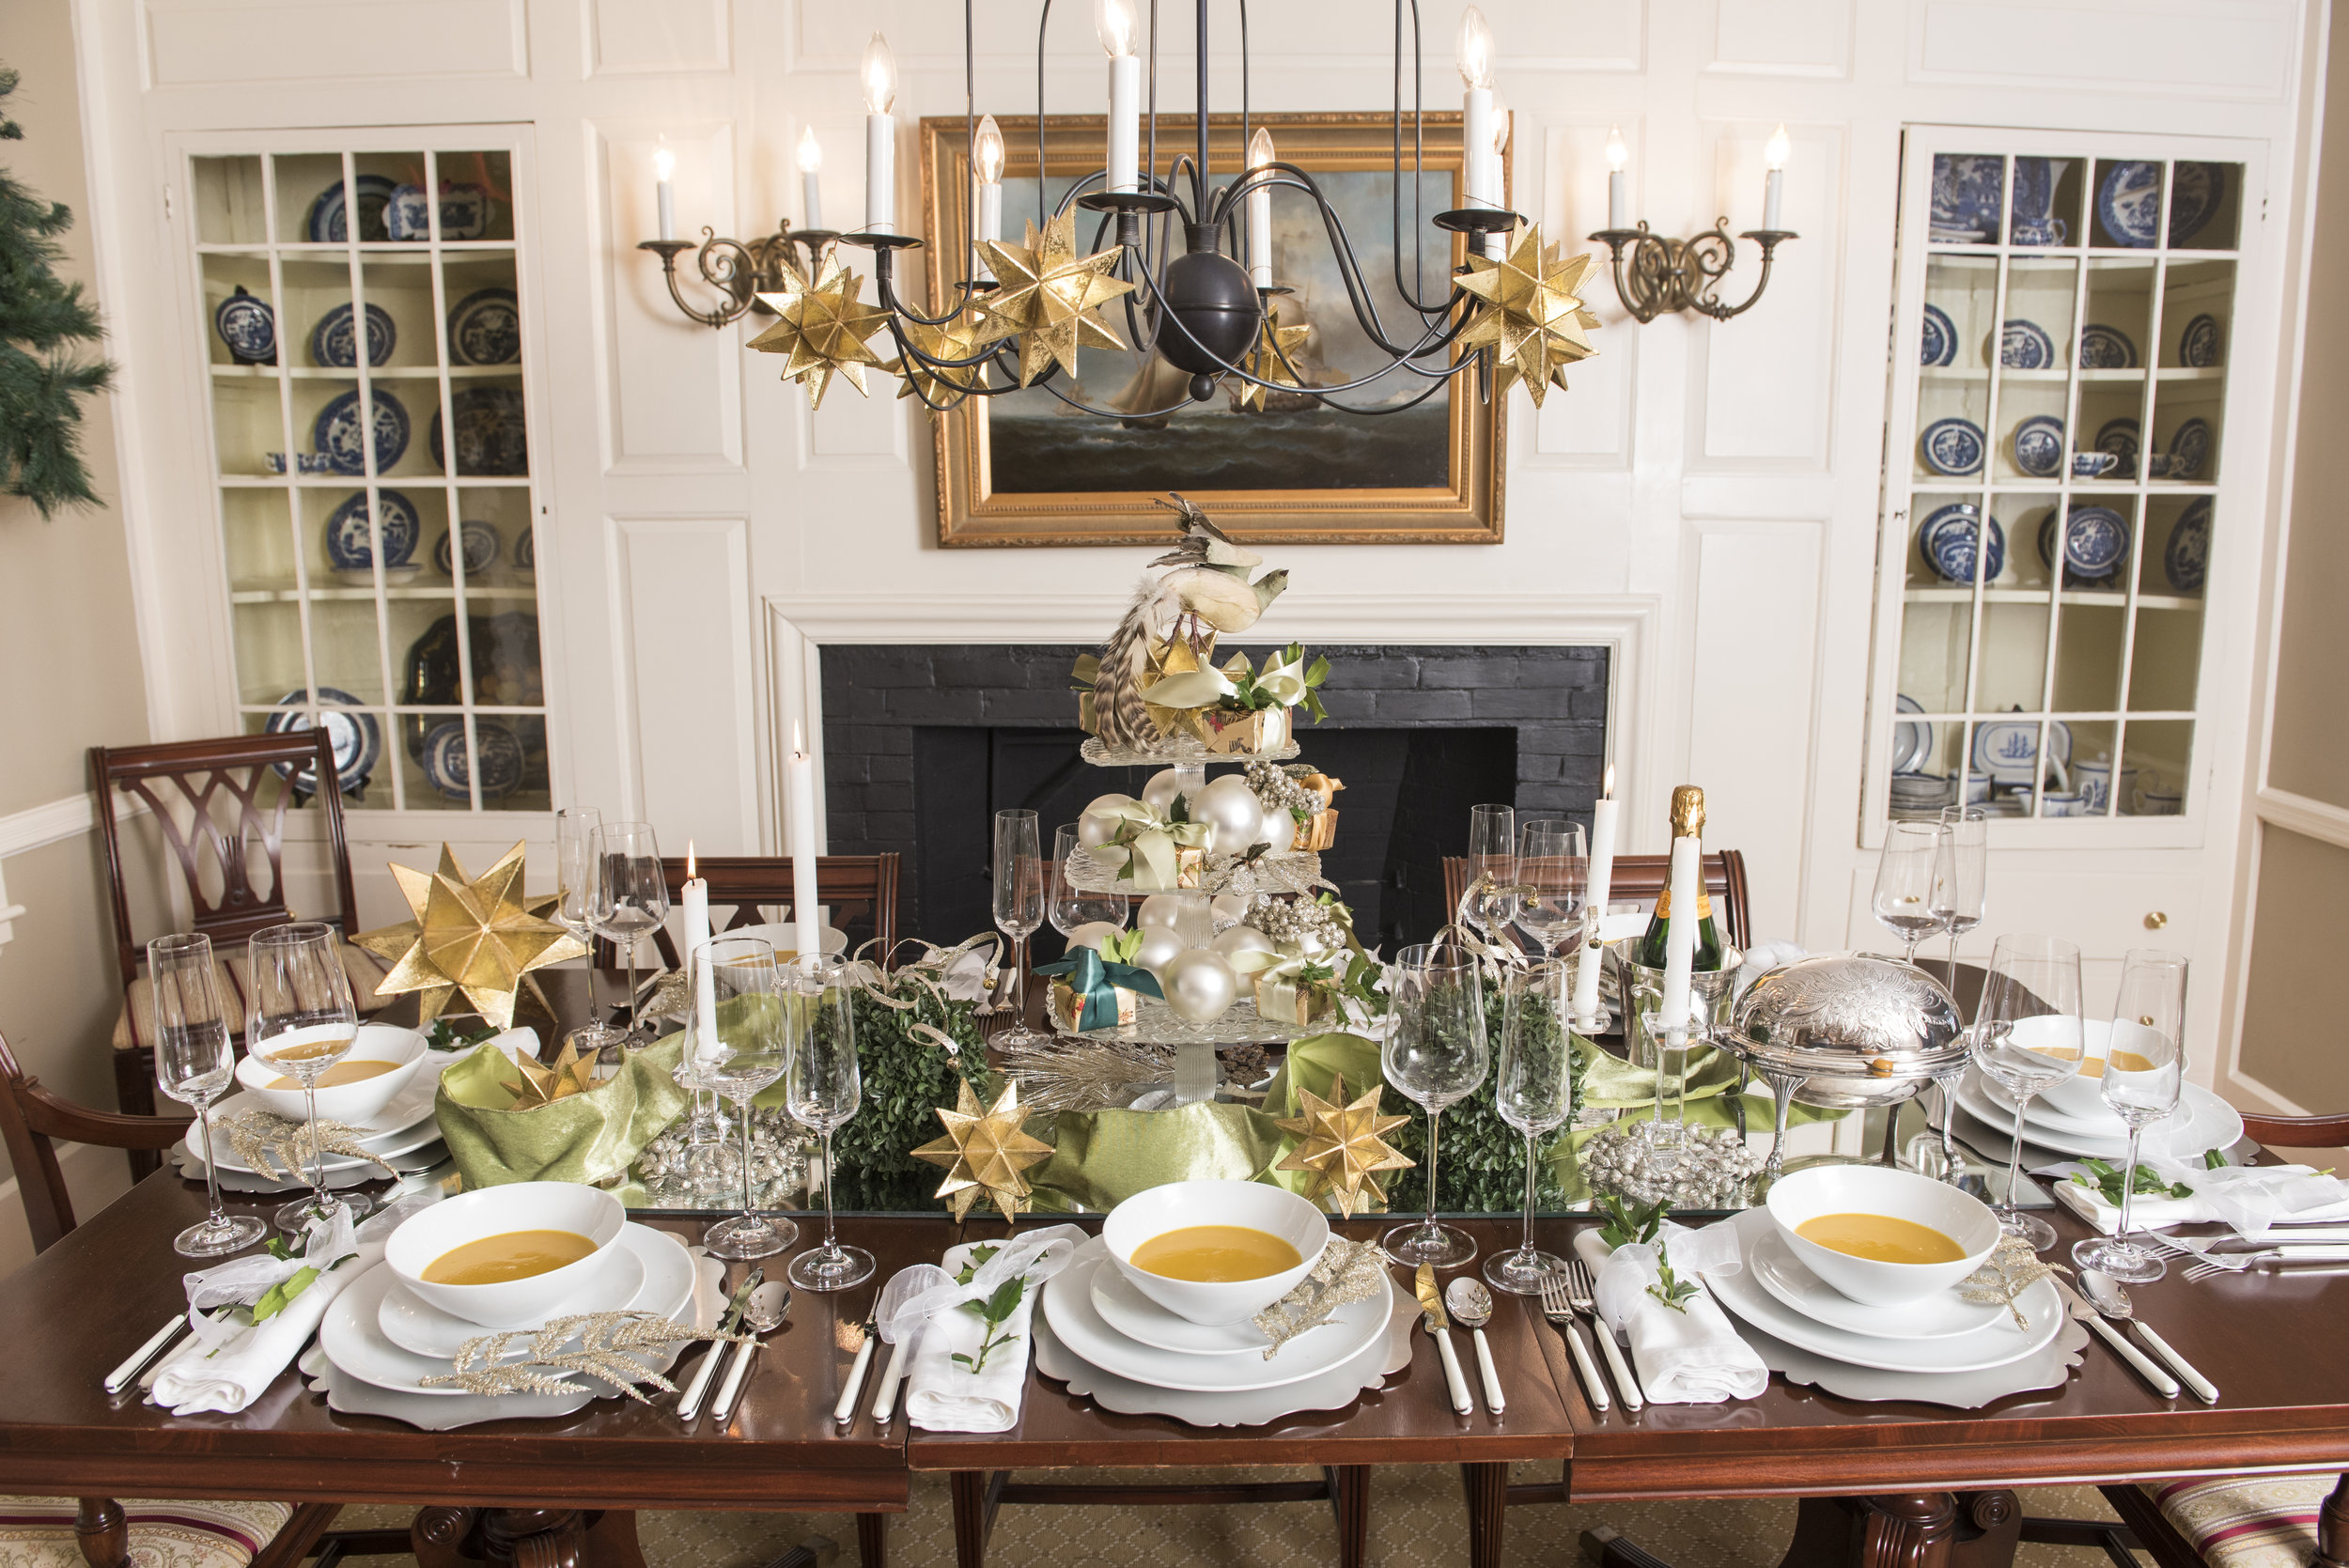 Nantucket Tablescapes Lyons Lifestyle, Formal Dining Room Tablescapes